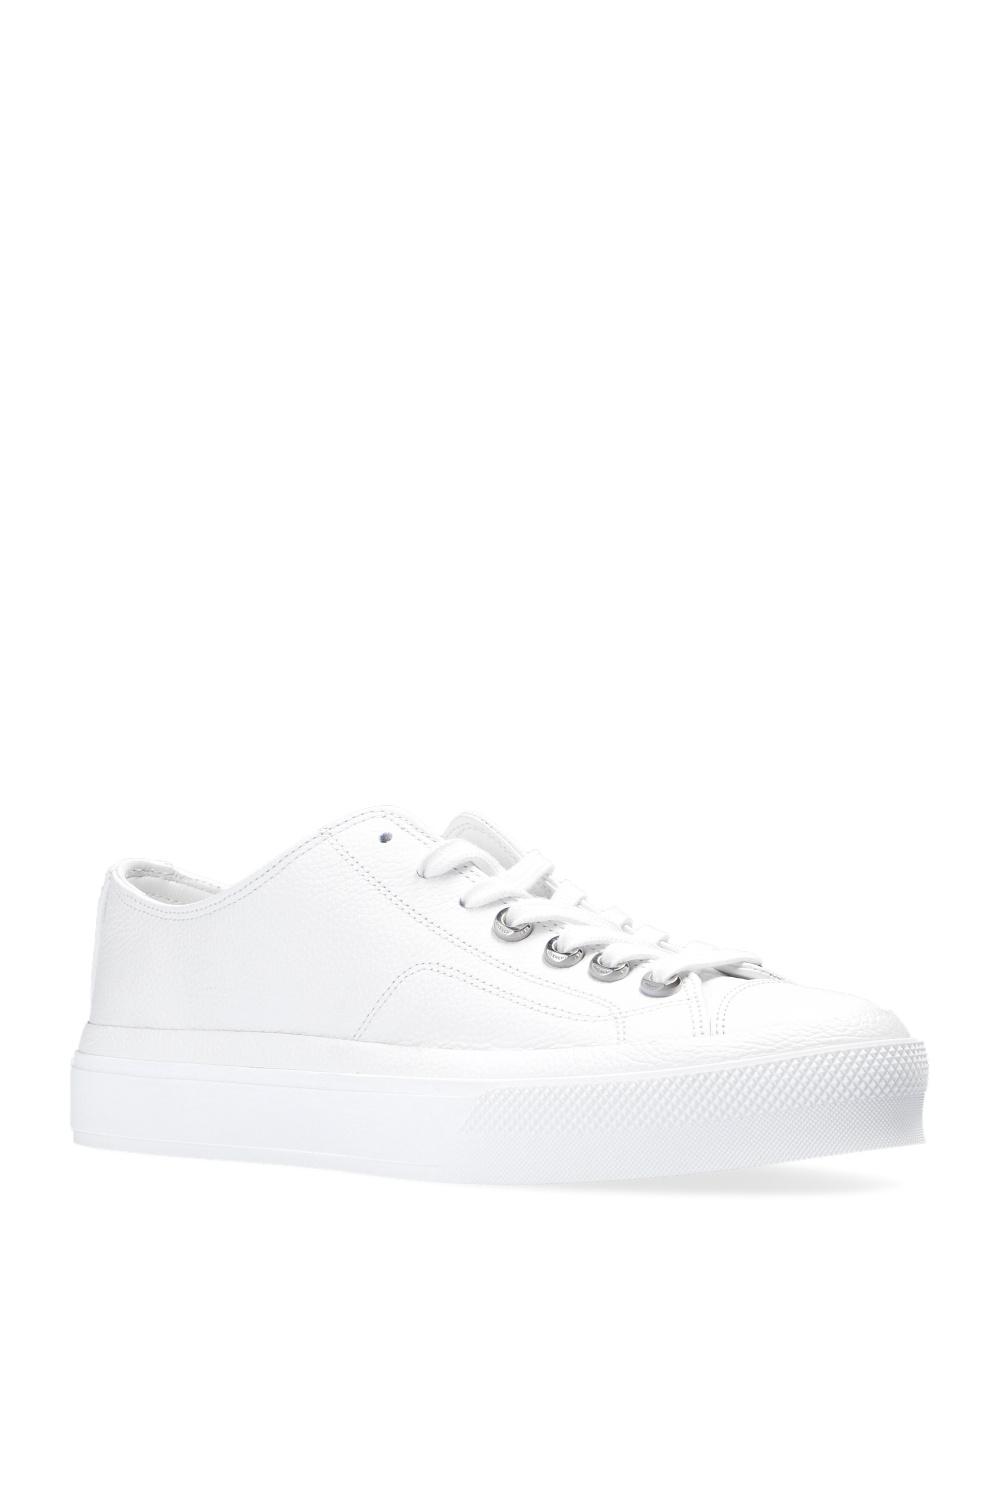 Givenchy Leather 'city Low' Sneakers in White | Lyst